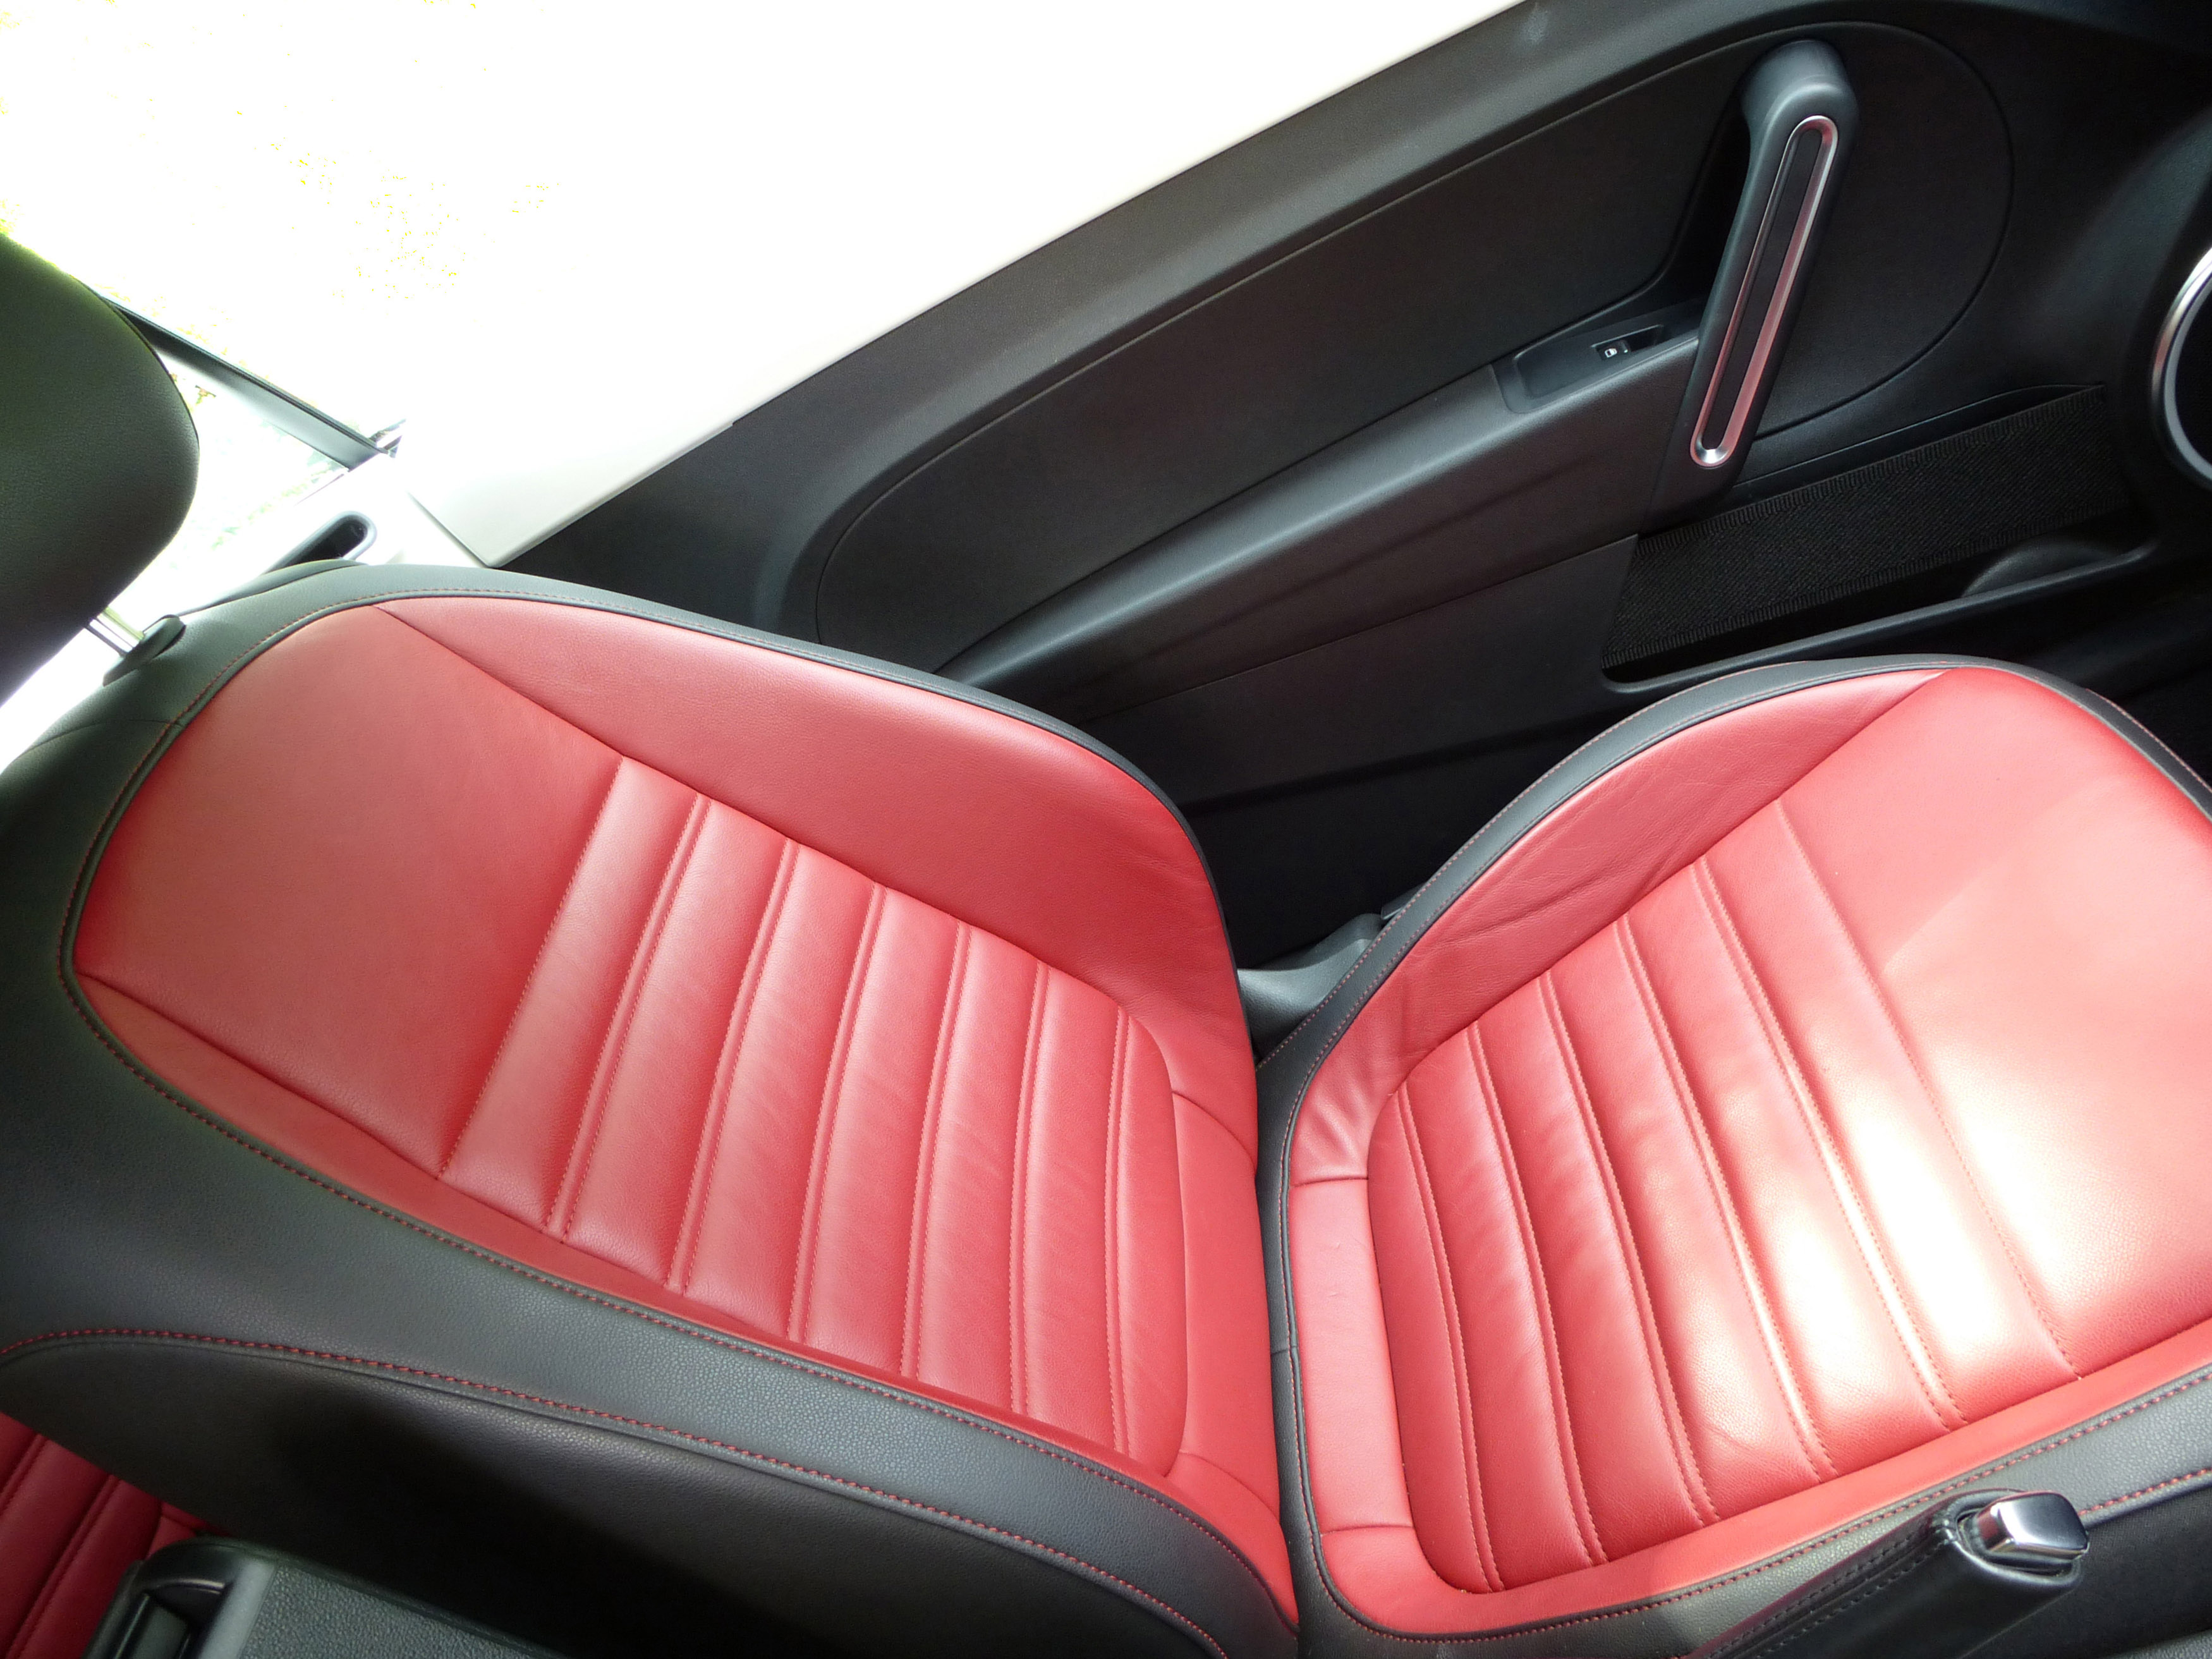 Free Stock Photo 16359 Red leather seat in a modern car freeimageslive